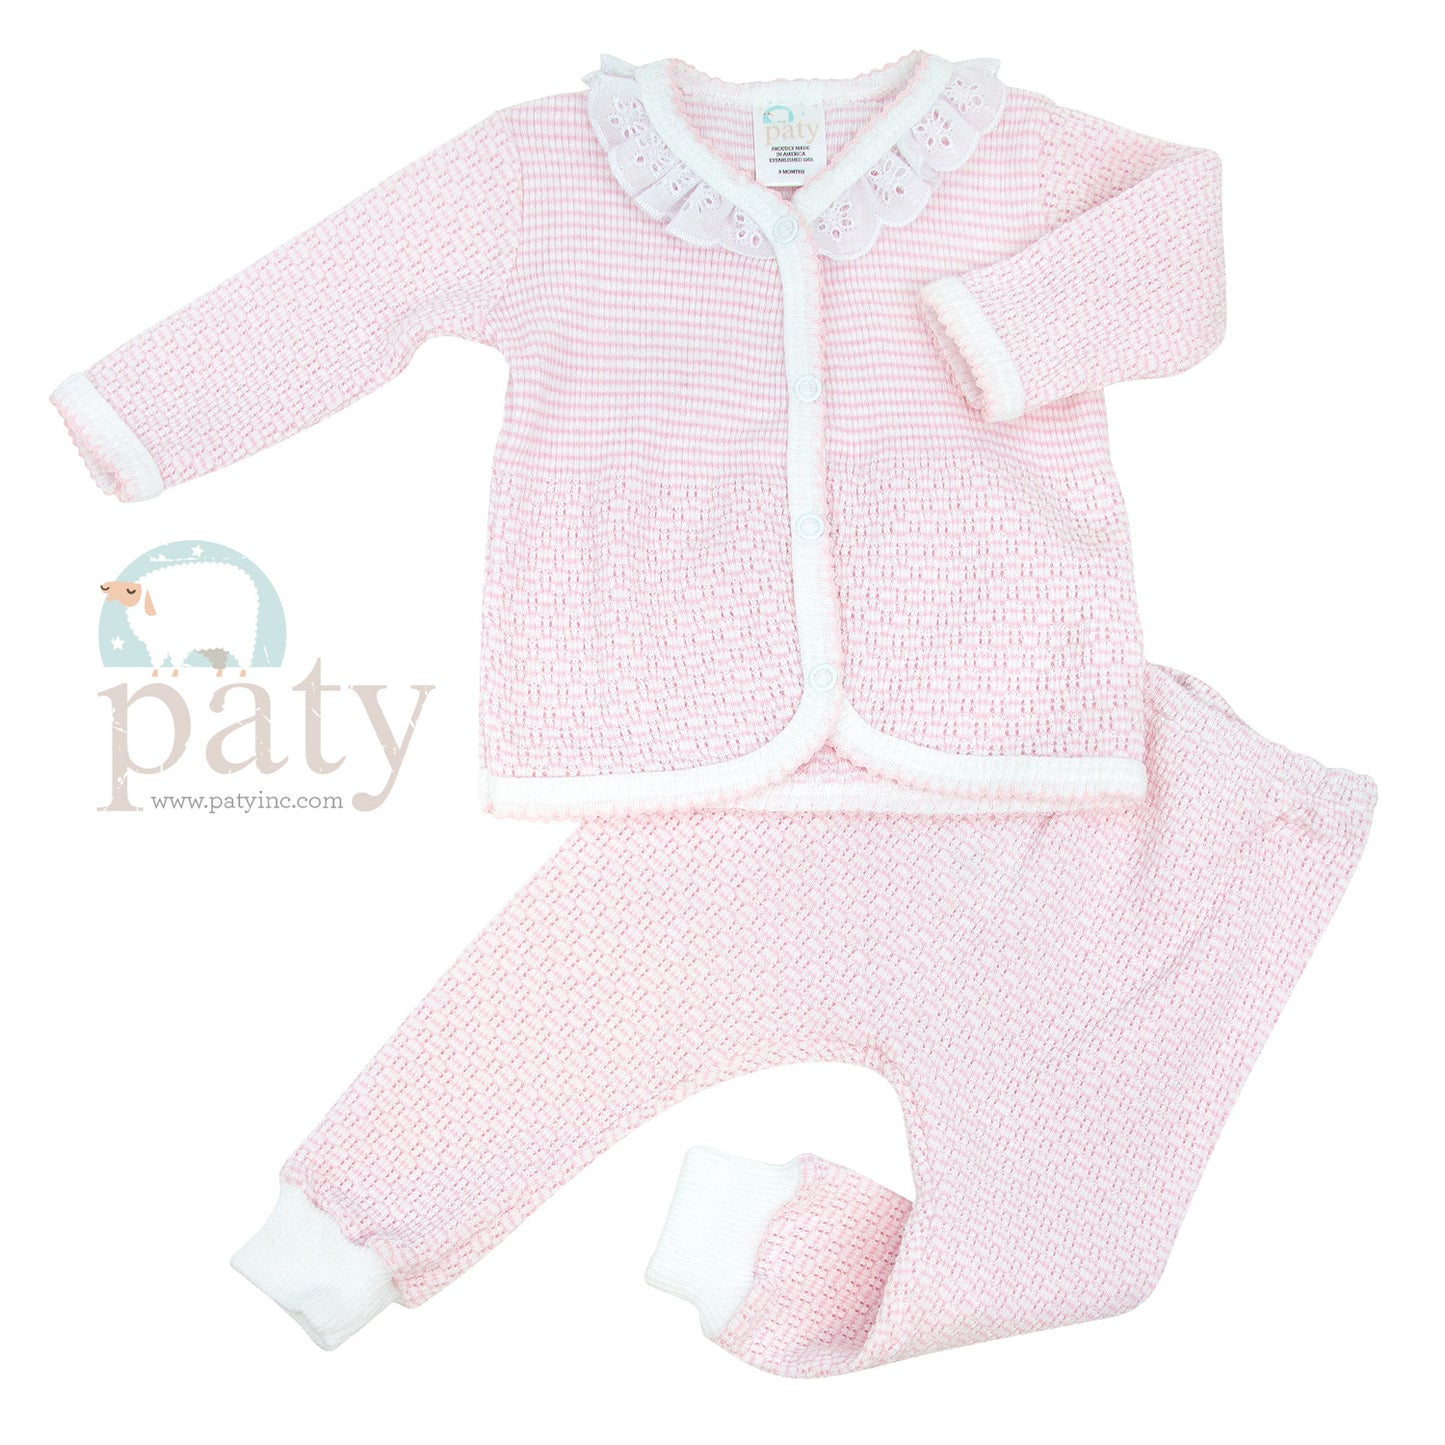 Paty 2 PC Set Pink Knit with Eyelet Trim and Pants